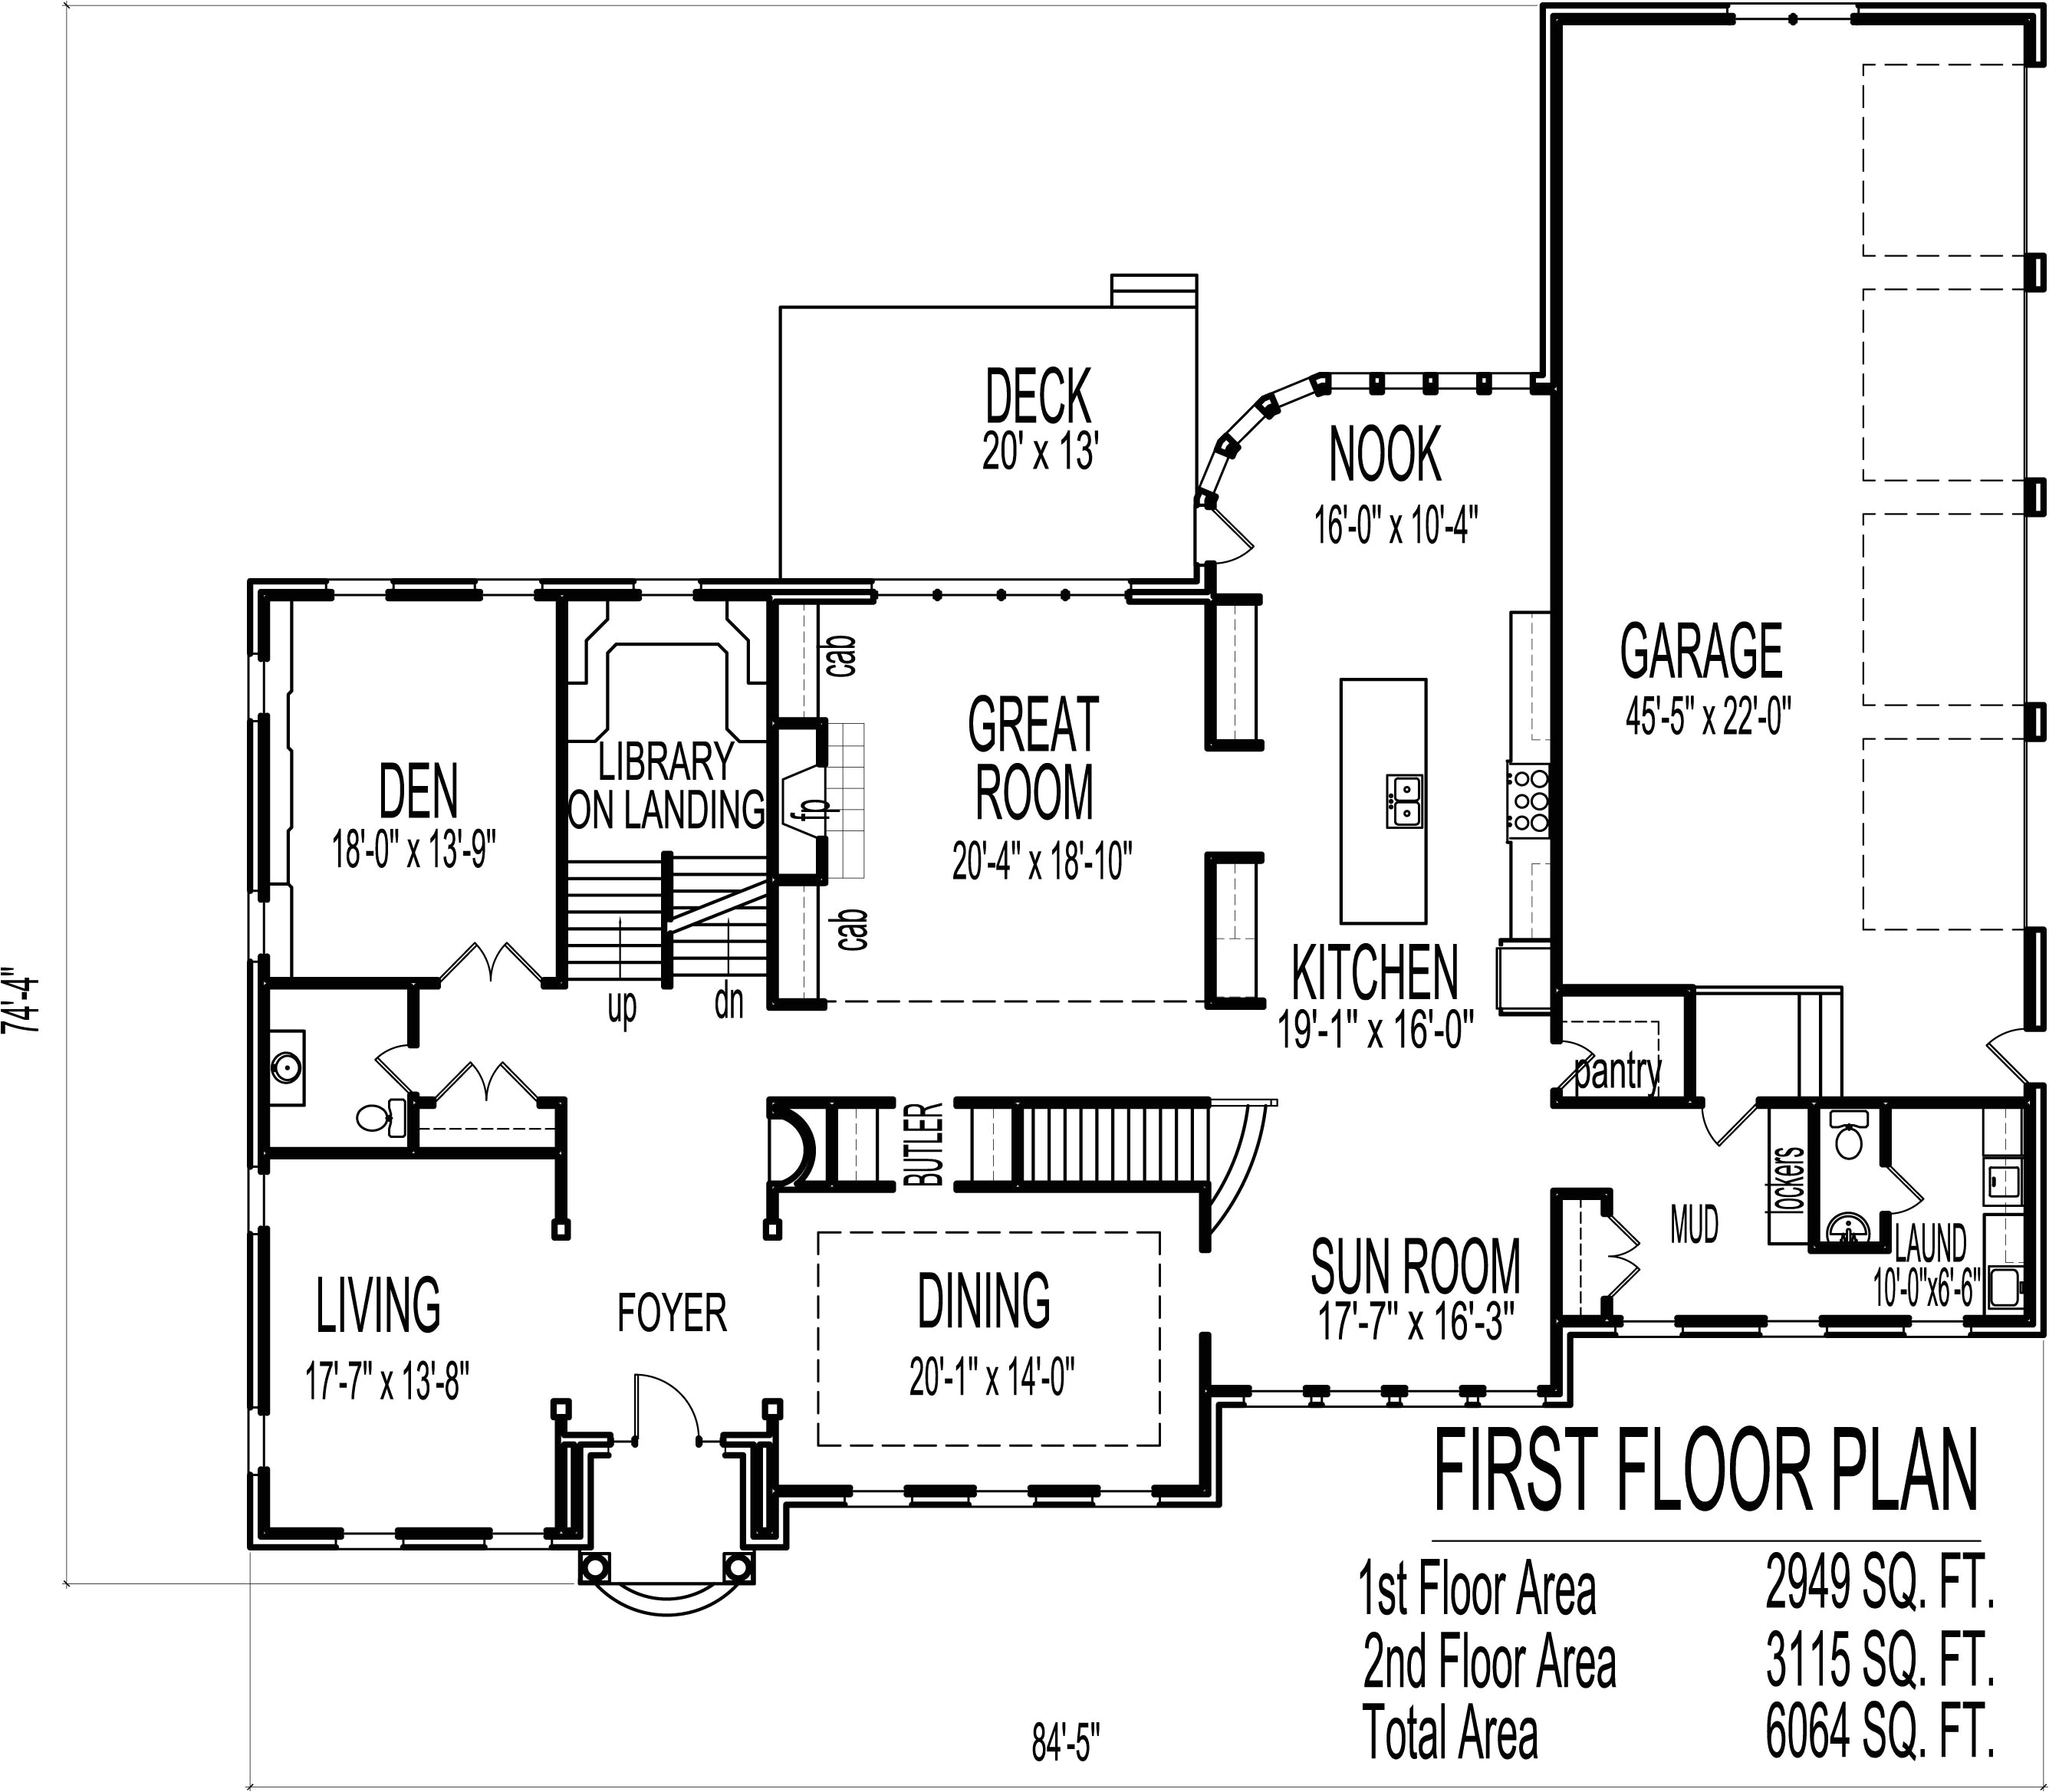 4 bedroom two storey house plans awesome 4 car garage house plans plans for small houses